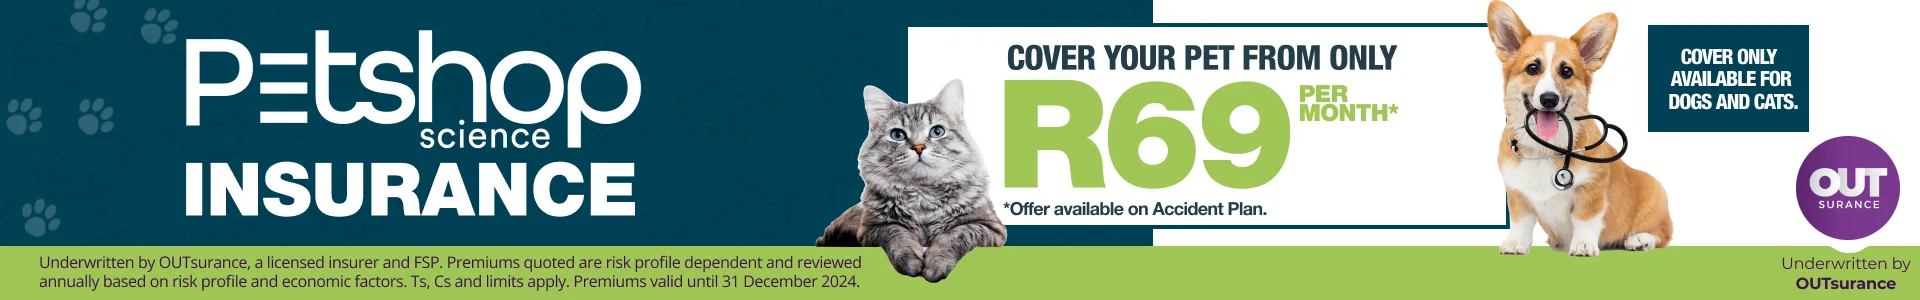 Petshop Science pet insurance is underwritten by OUTsurance, a licensed insurer and FSP. Premiums valid until 31 December 2024.